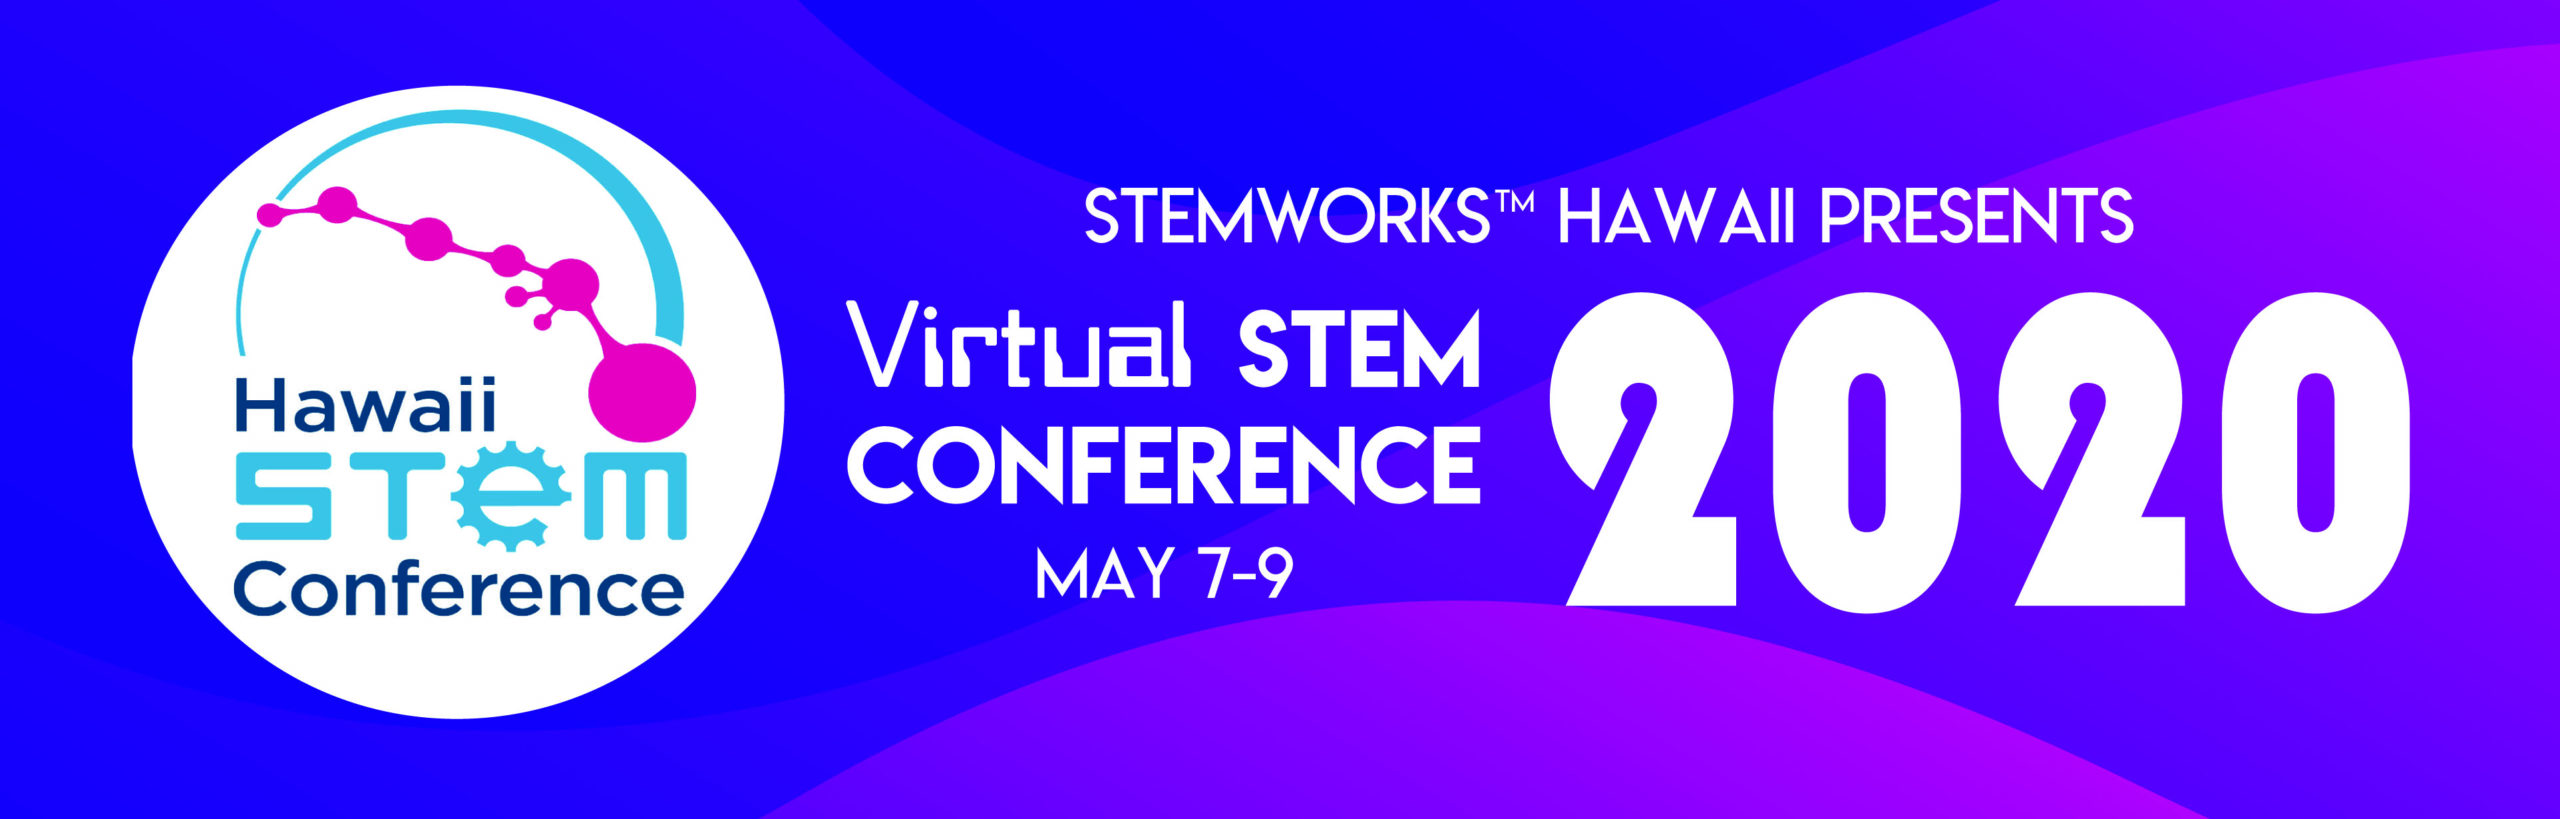 Virtual banner for STEMworks Hawaiʻi Virtual Stem Conference 2020 on May 7-9